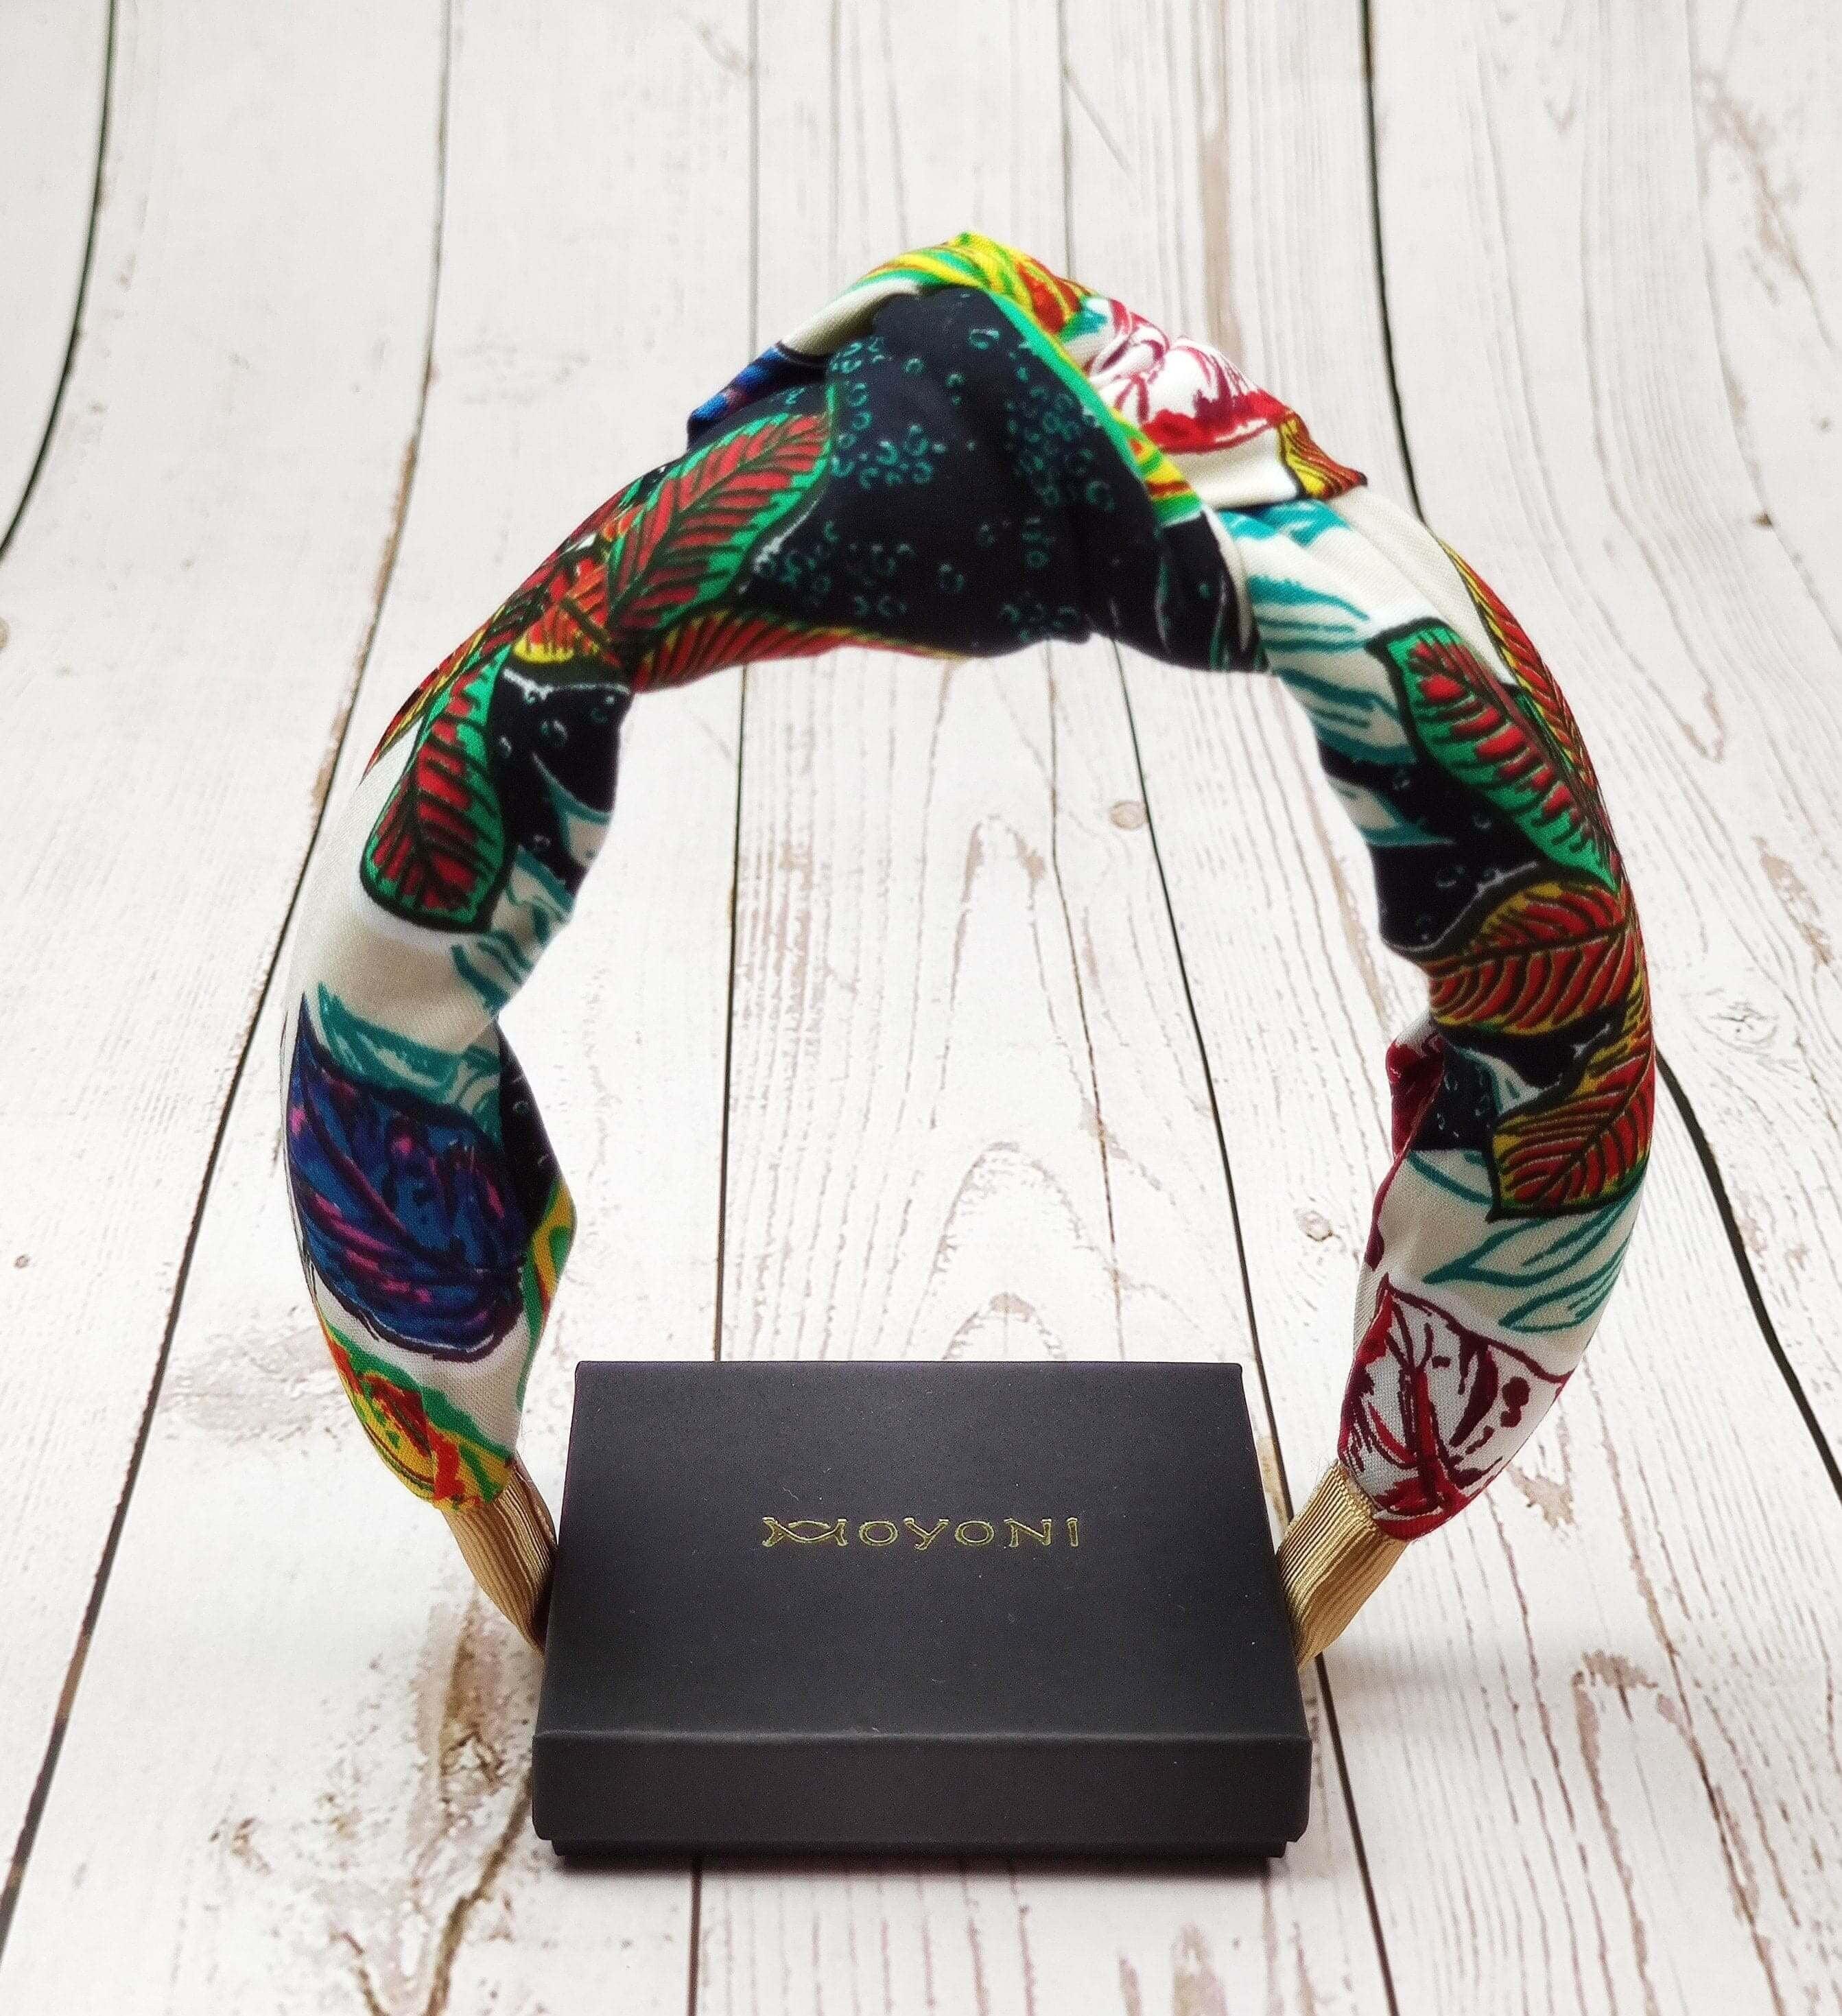 Luxurious Stylish Knotted Headband for Women in Dark Blue, Yellow, Green, and Red Colors - Wide Cotton Padded Hairband for a Fashionable Look available at Moyoni Design